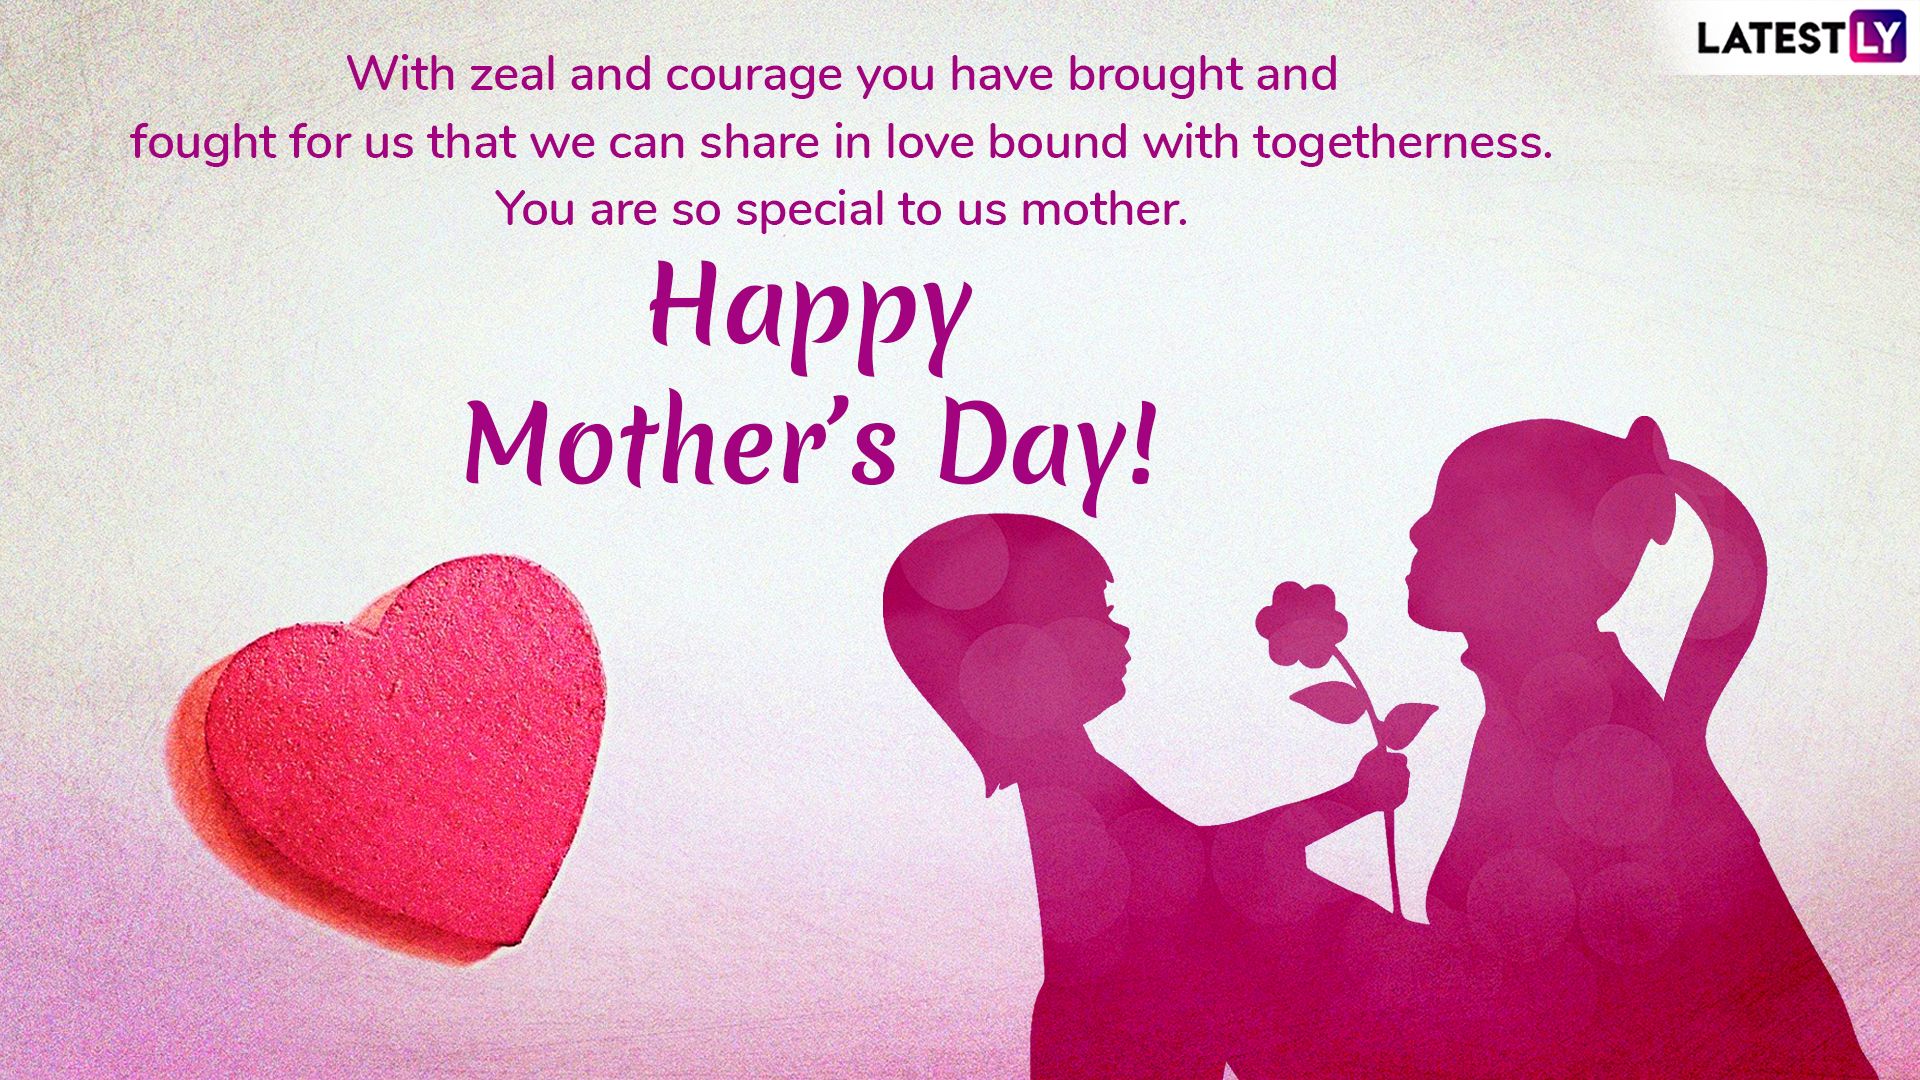 Mother's Day 2019 Wishes Wallpaper